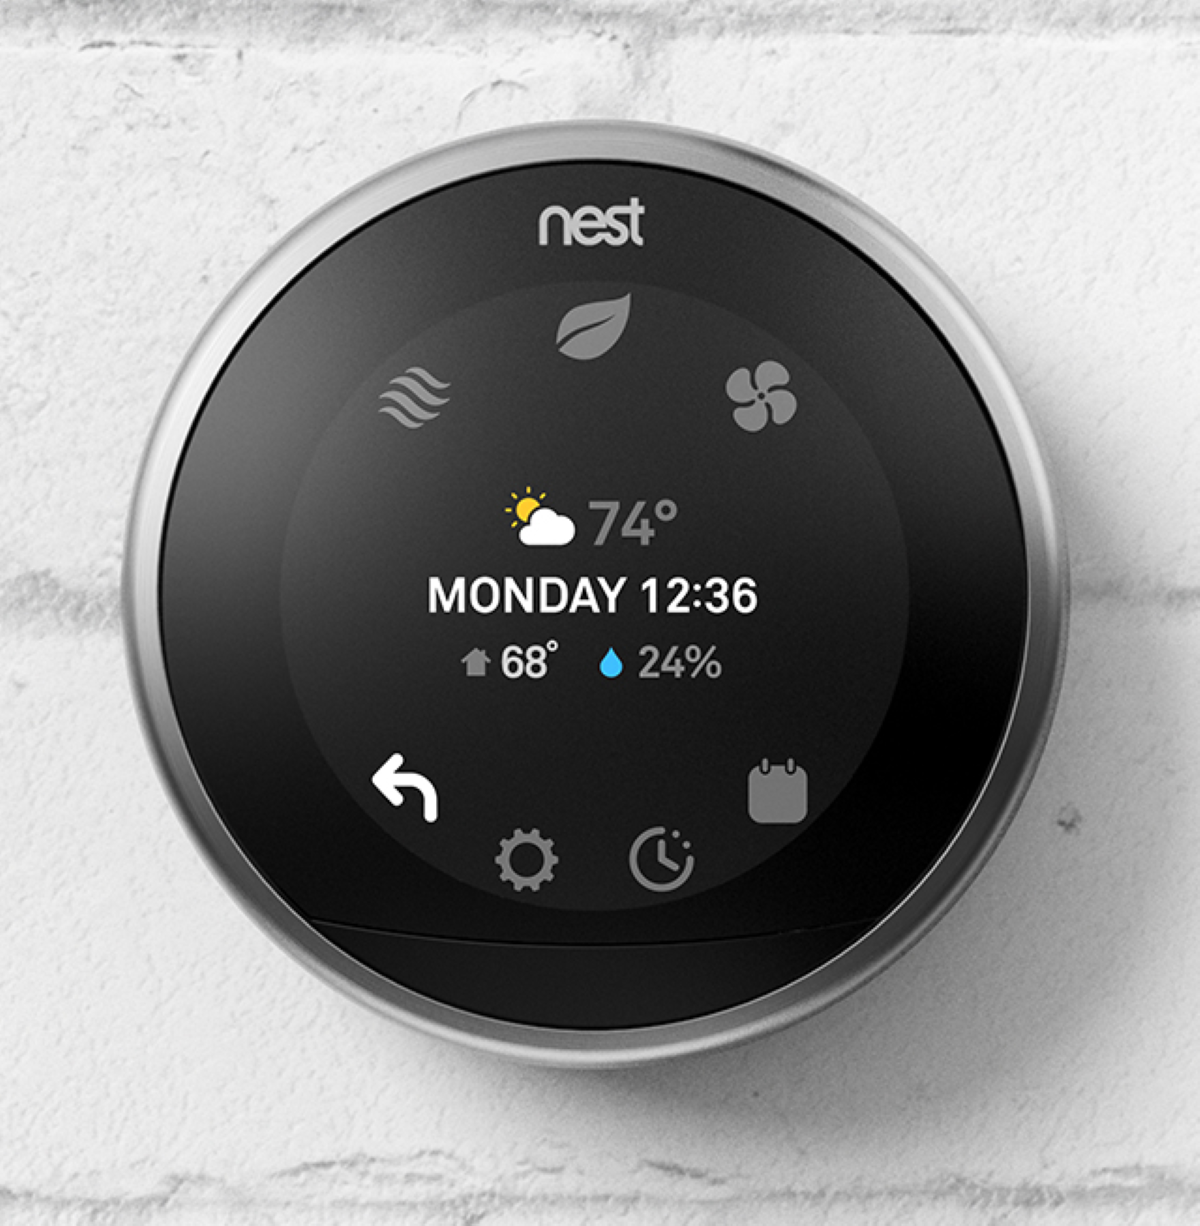 Google Nest Learning Smart Home Thermostat - Farsight Mode